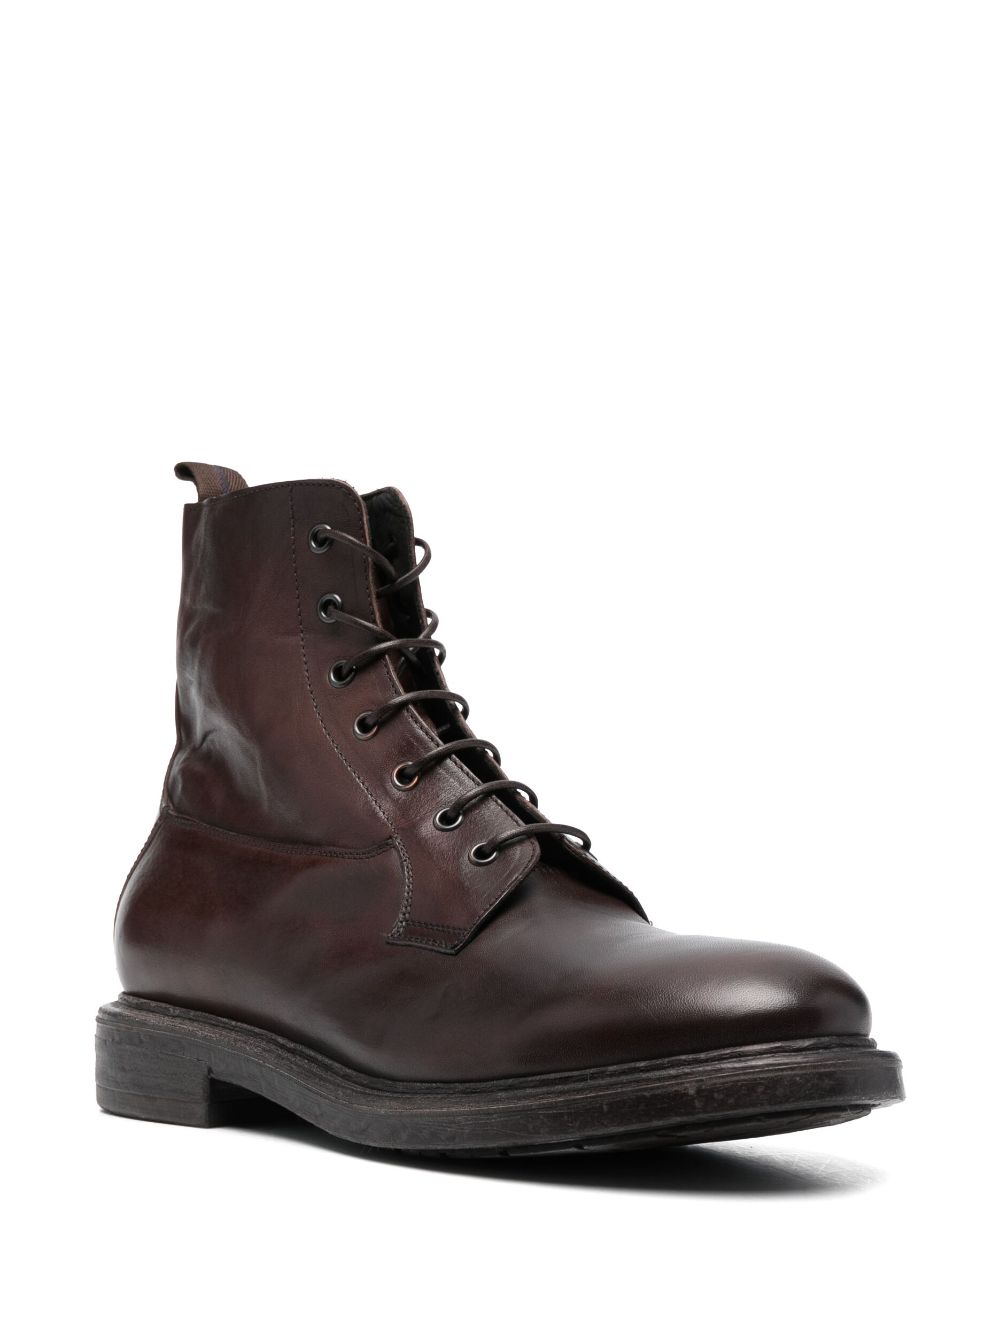 Moma Polacco lace-up leather boots - Bruin